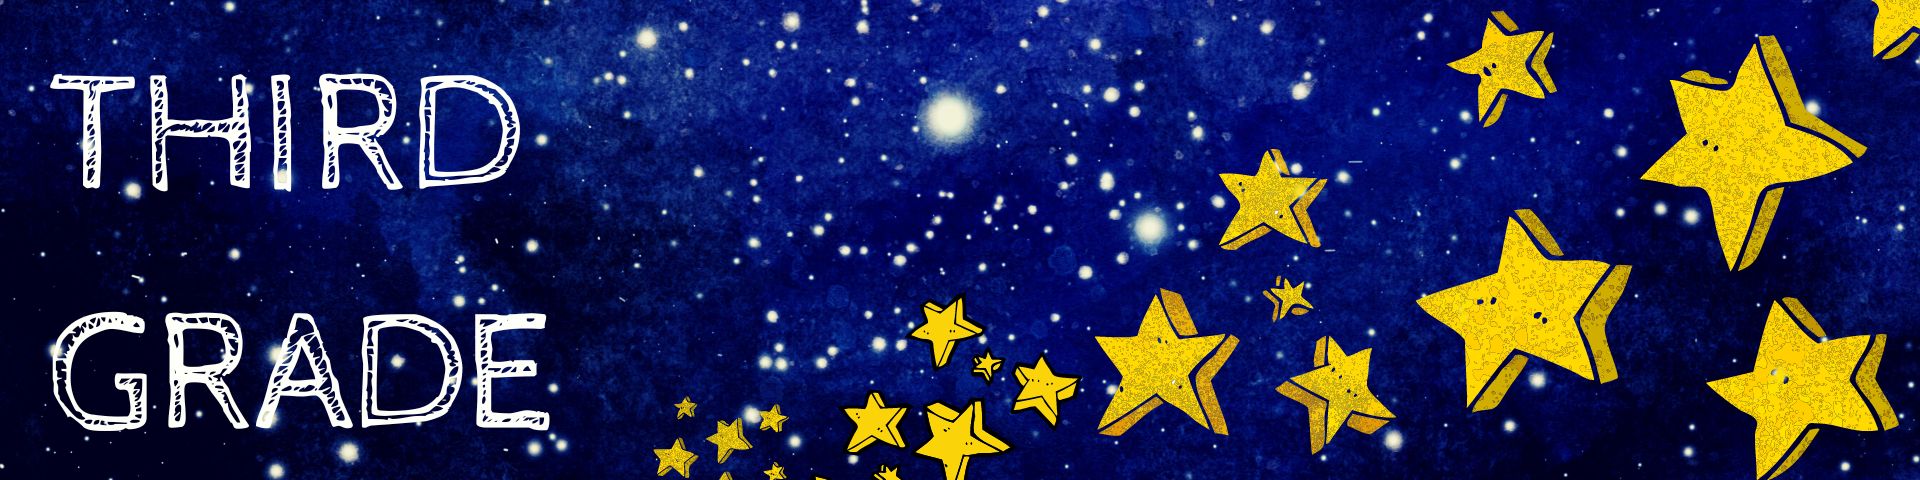 3rd grade with stars and night sky background